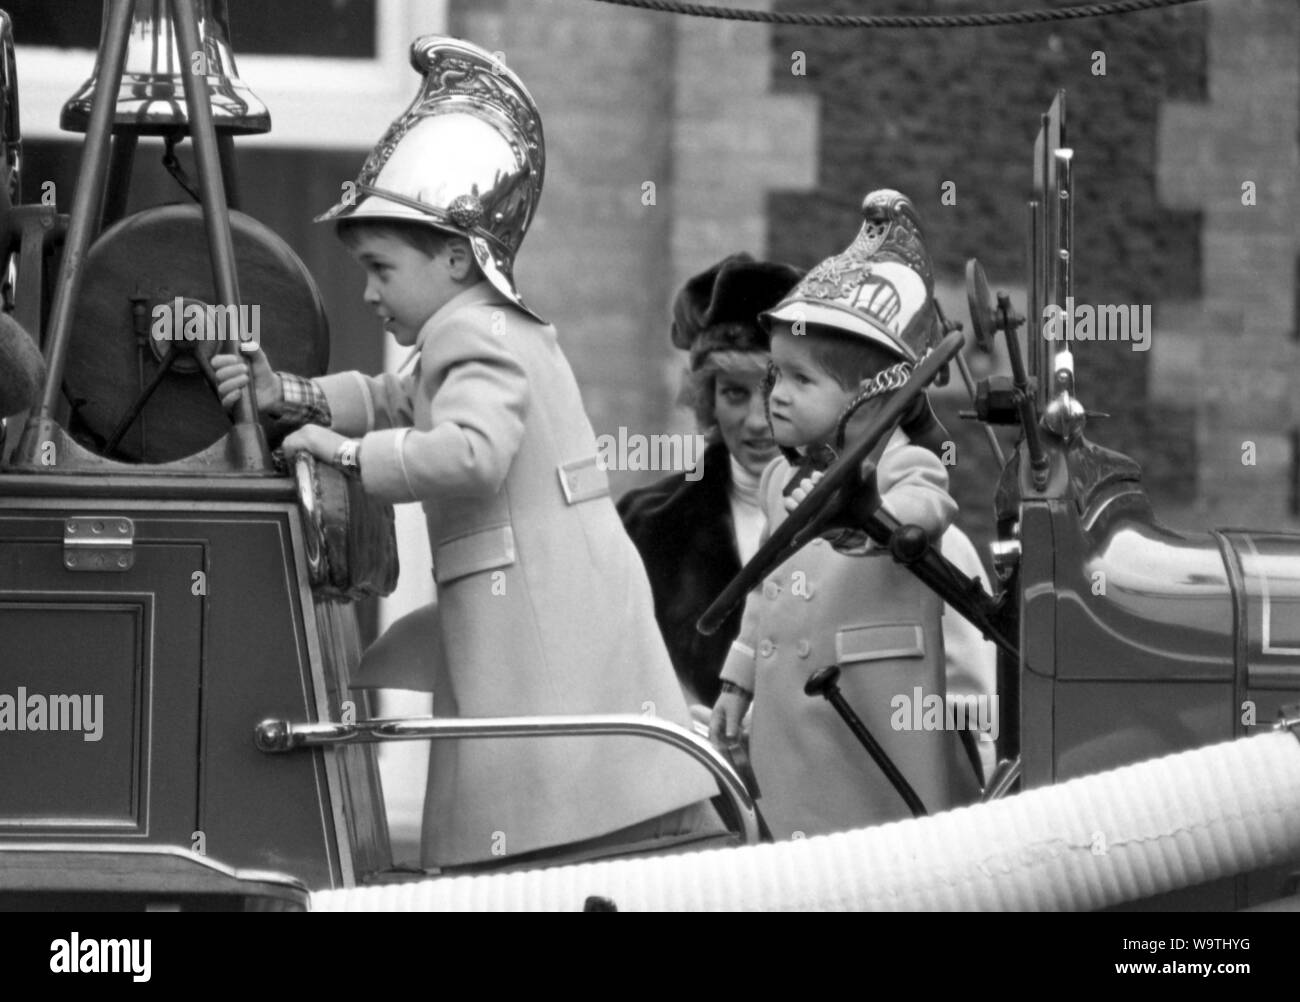 Princess Diana with Prince's William and Harry enjoying a climb over a vintage fire engine at Sandringham. Stock Photo